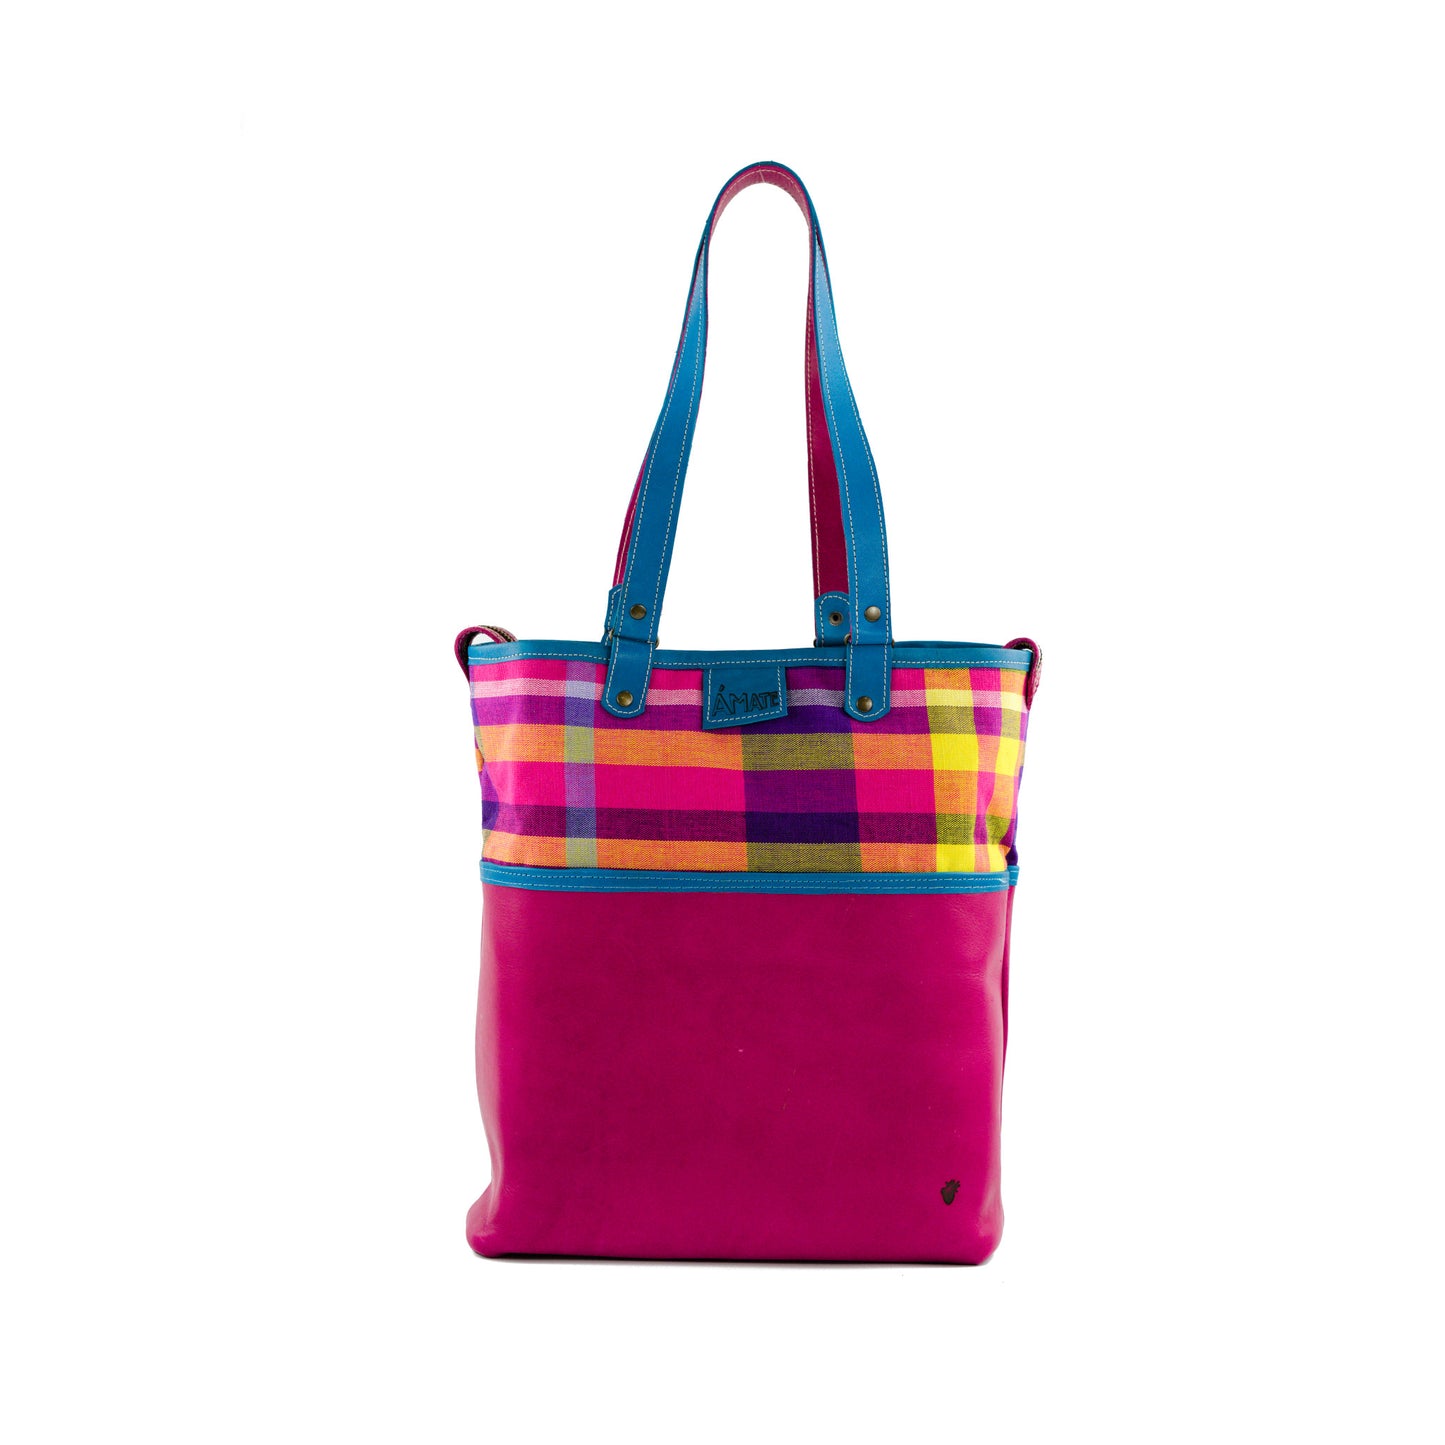 Tote Colors - Pink Yellow